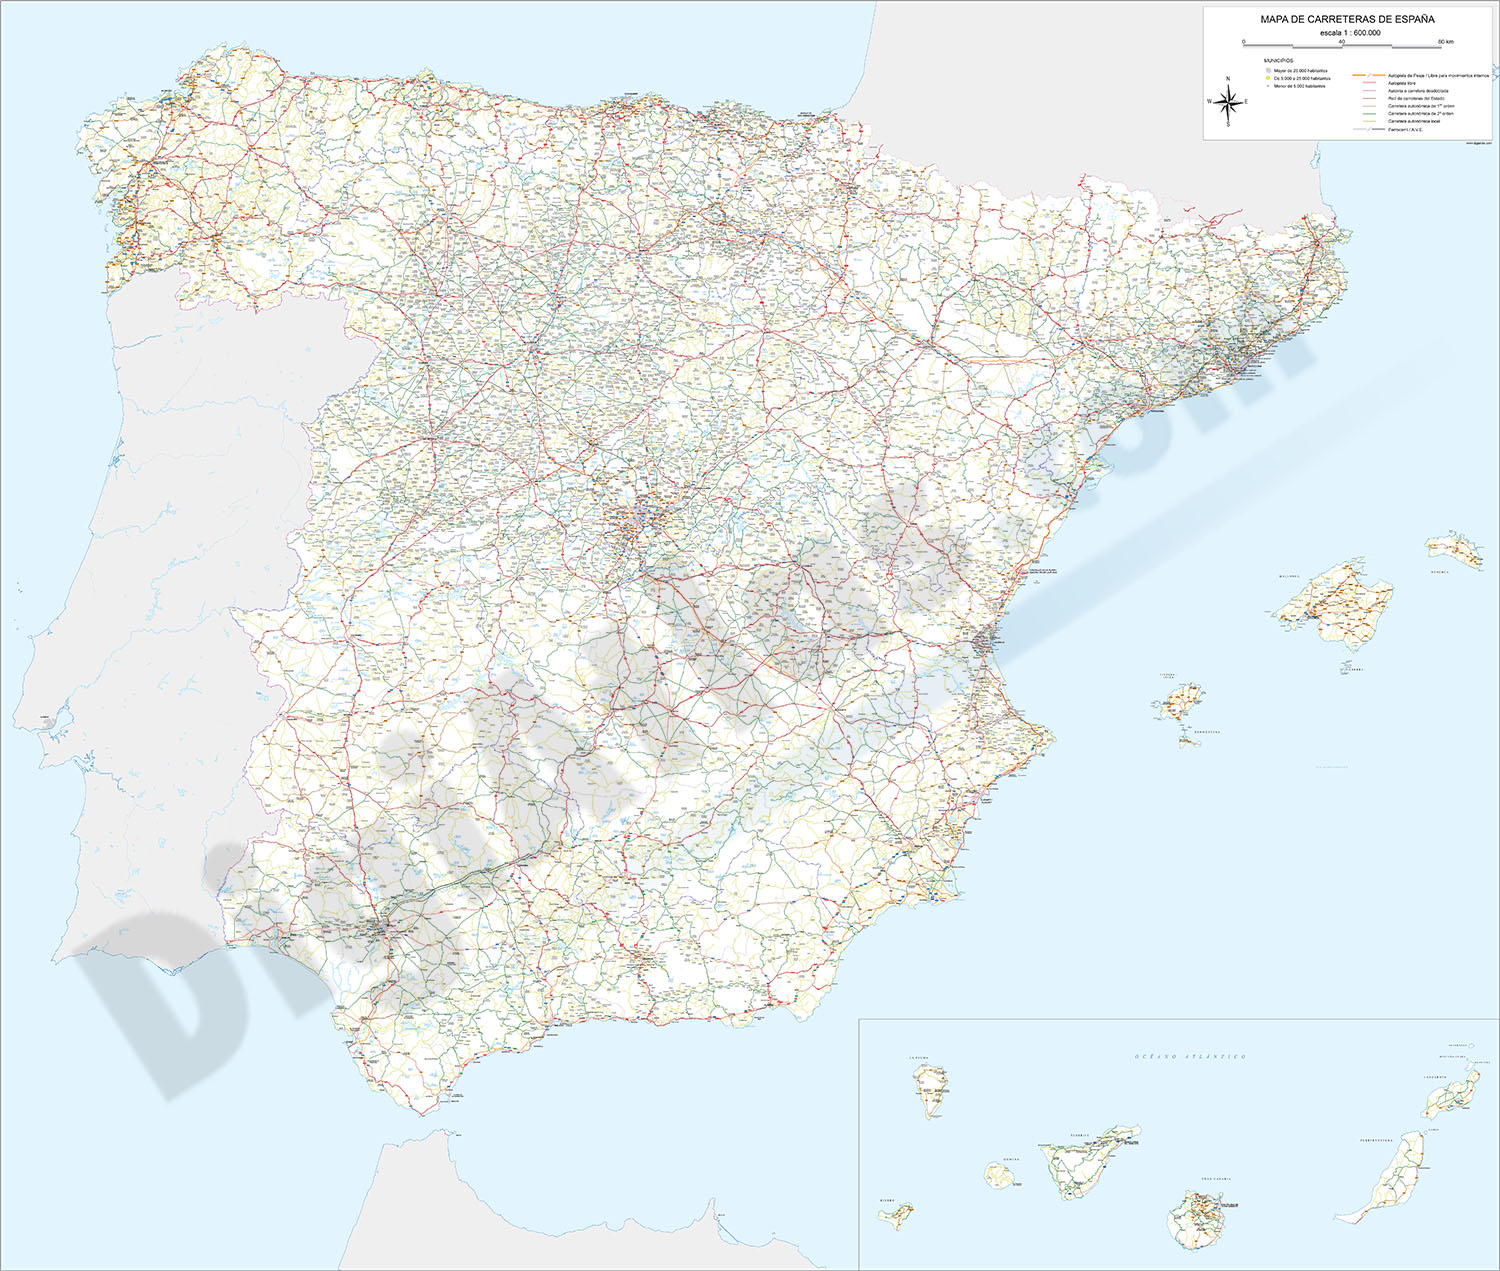 Detailed roads and cities map of Spain